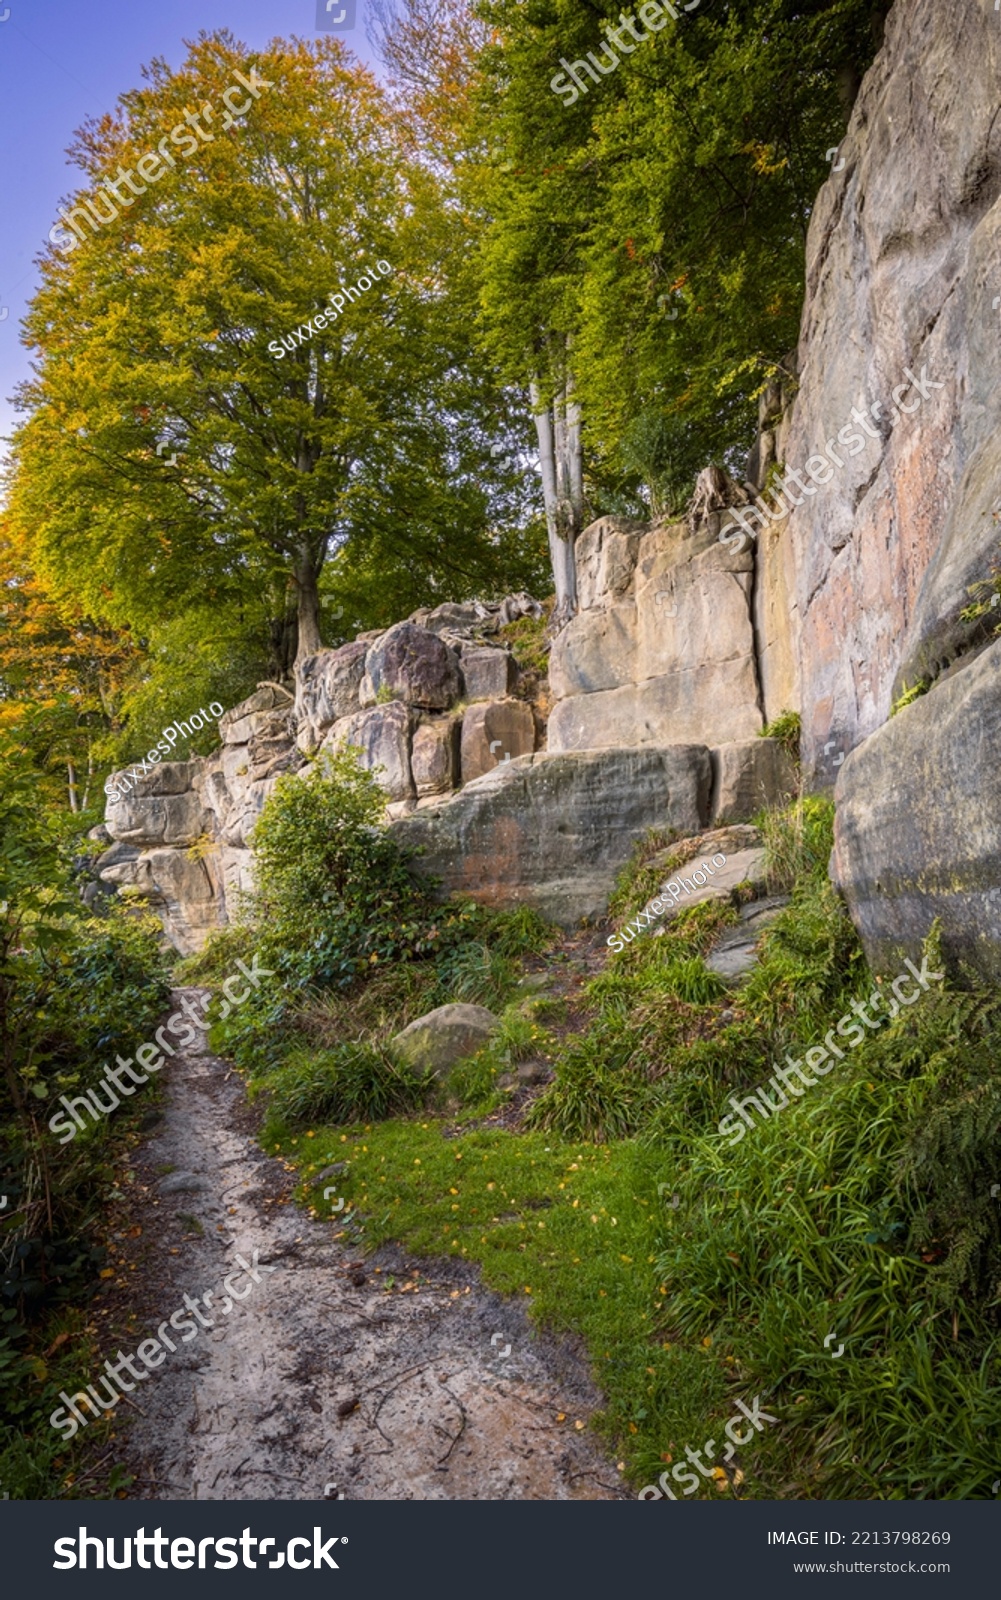 Autumn is coming at Harrisons Rocks on the high weald near Groombridge on the East Sussex Kent border south east England #2213798269